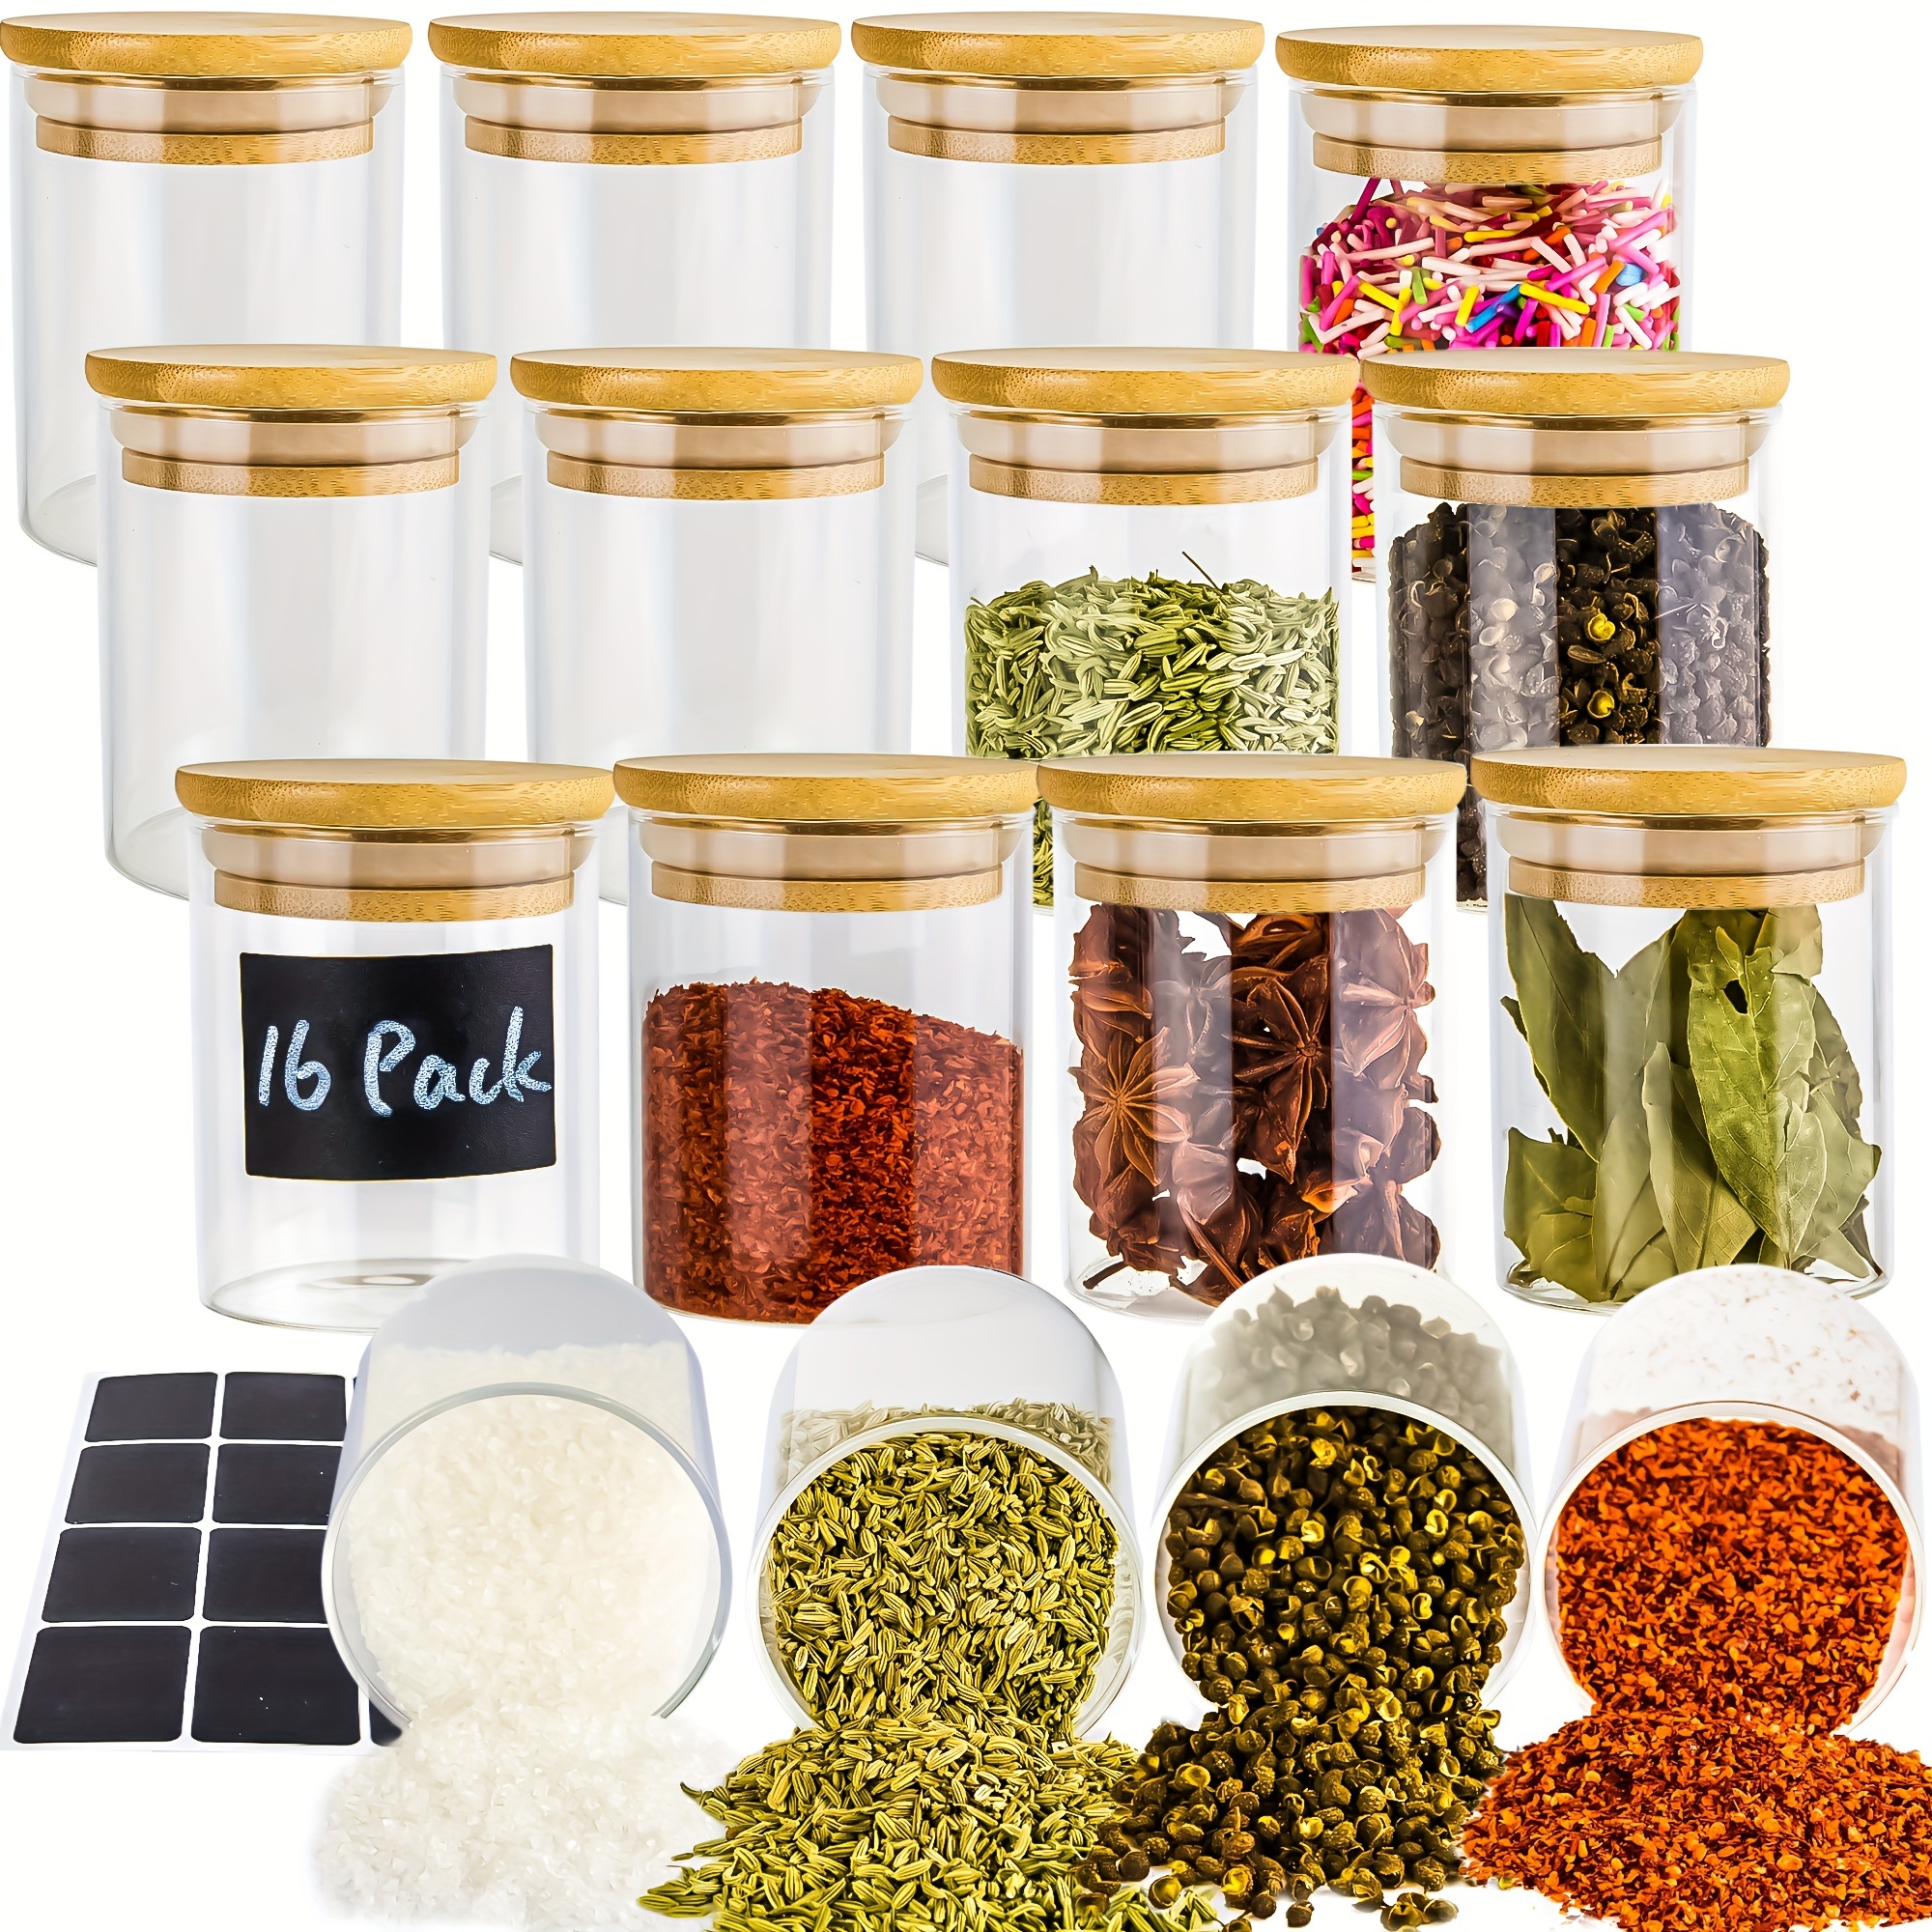 

[16-pack] 6.5 Oz Glass Jars With Lids, Spice Jars Set With Bamboo Lids For Spice, Beans, Candy, Nuts, Herbs, Dry Food Canisters With Extra Chalkboard Labels